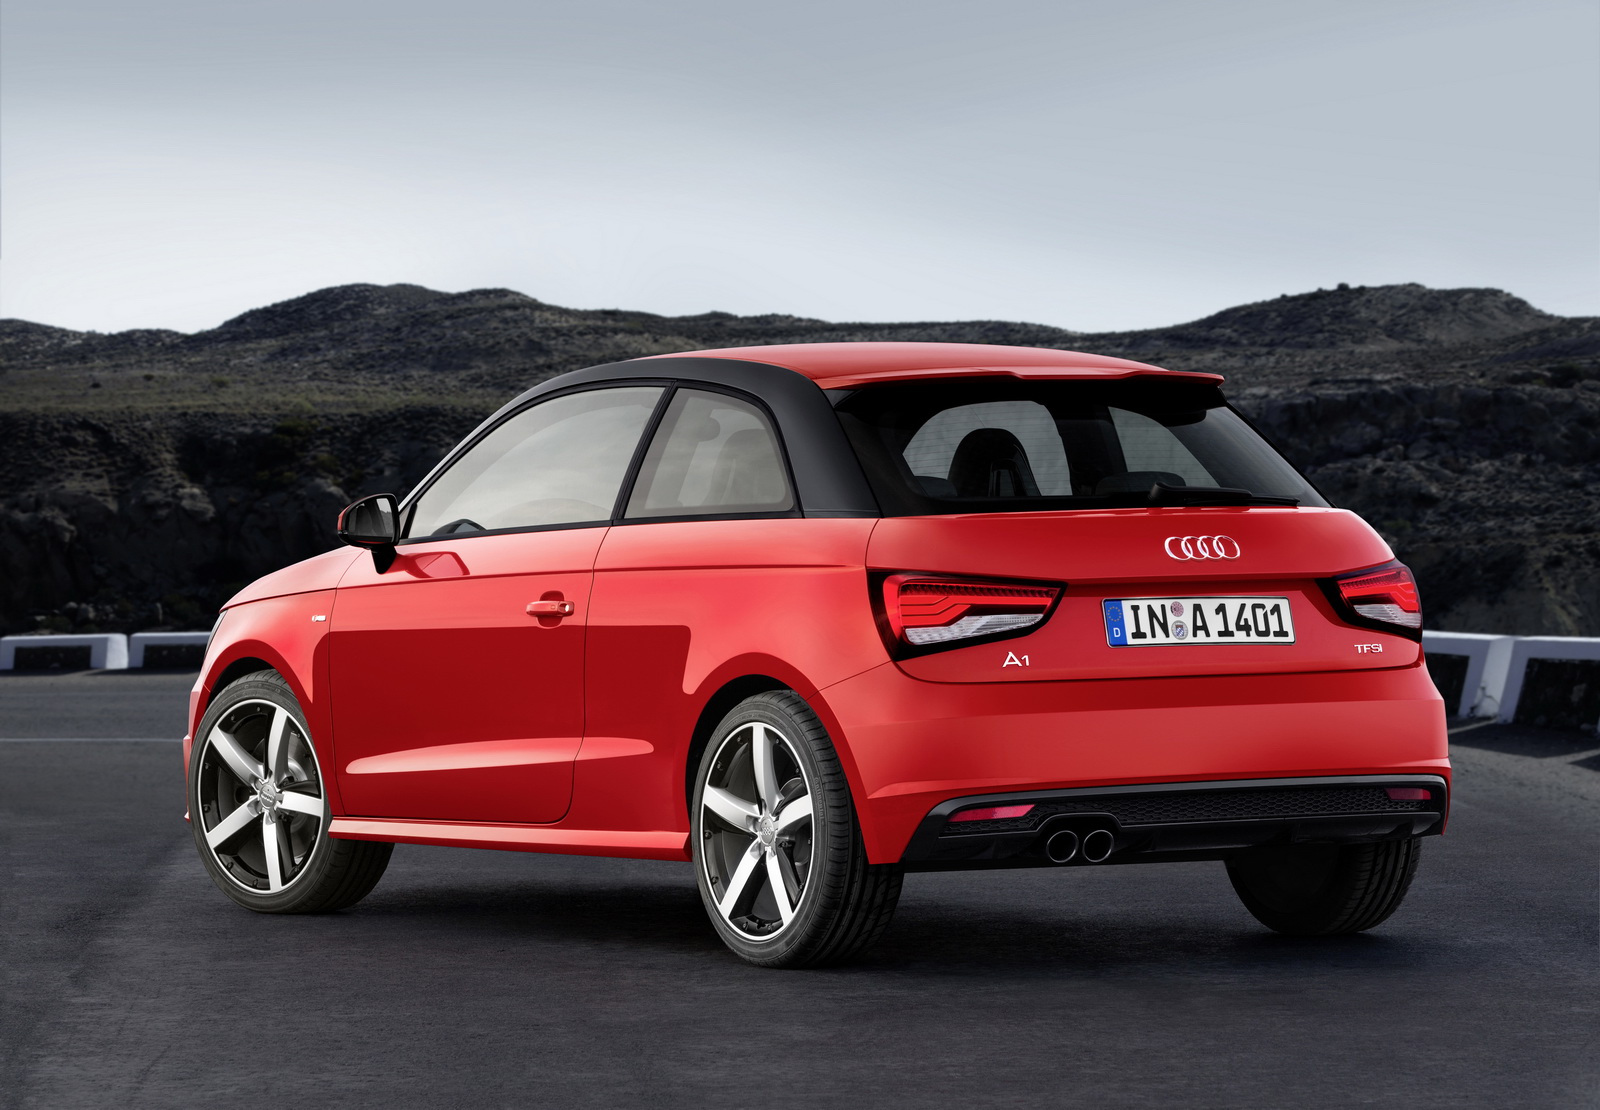 AUDI A1 car technical data Car specifications Vehicle fuel 